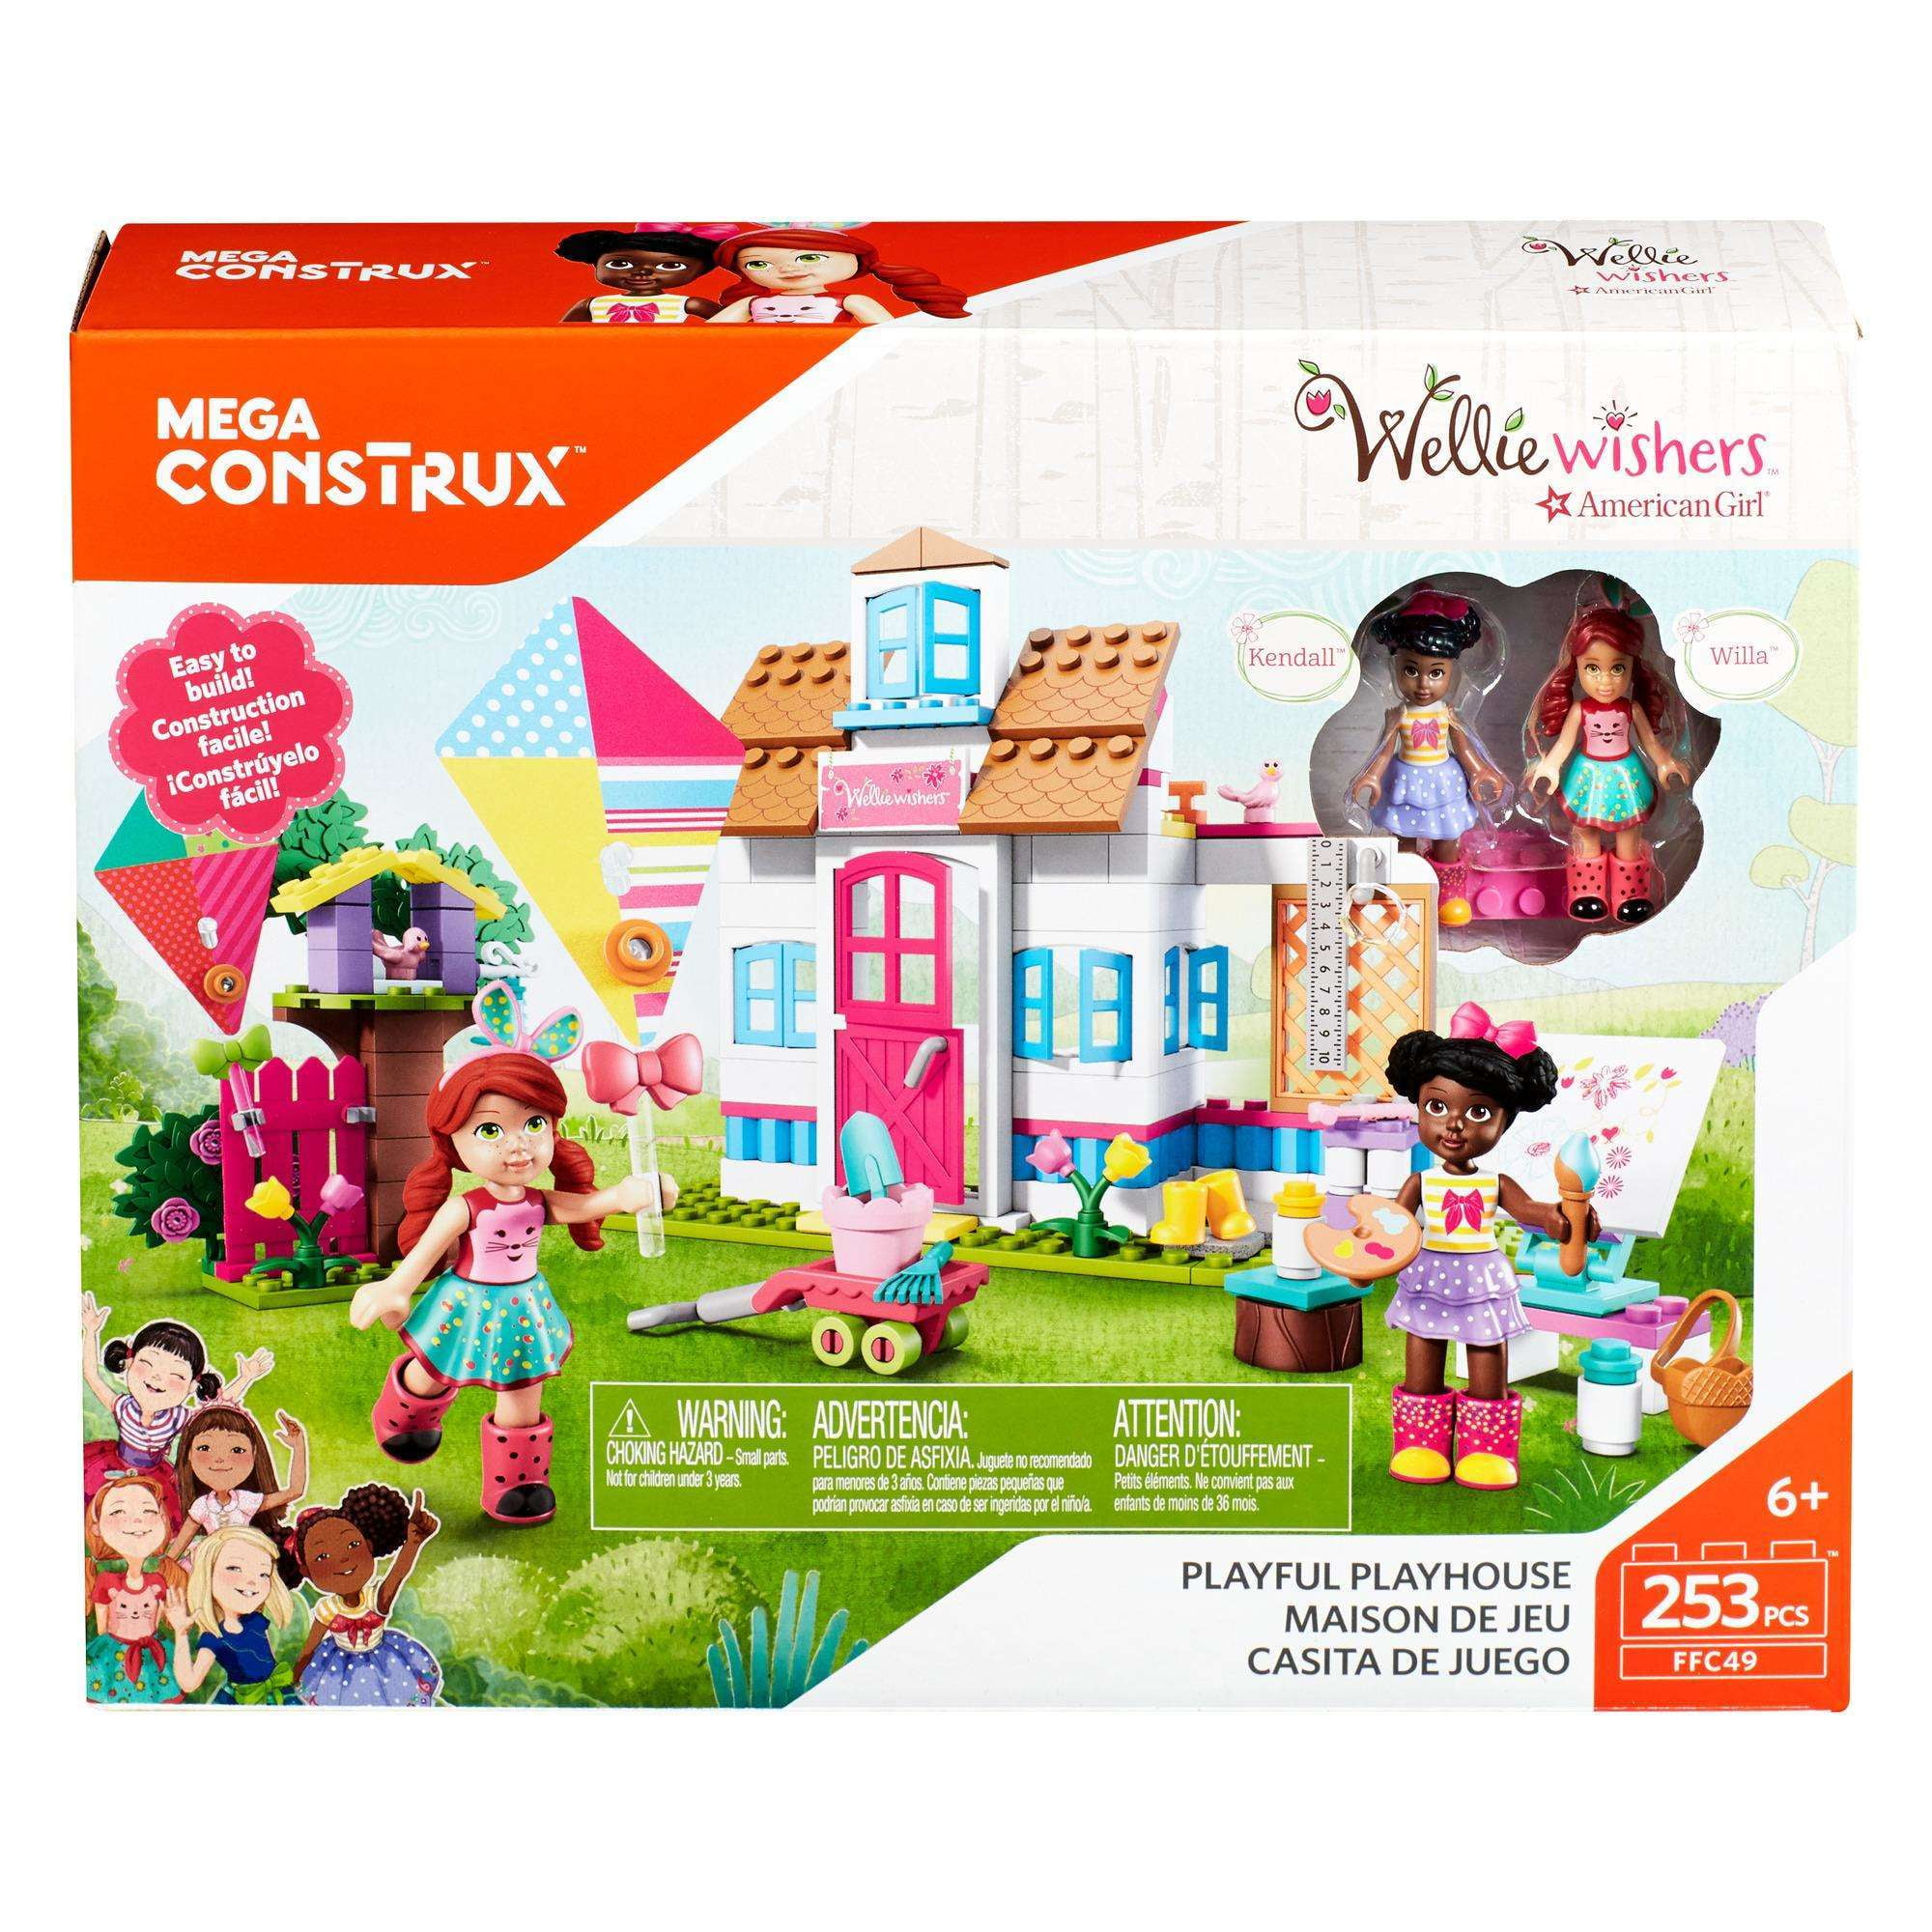 MEGA Construx Welliewishers Playful Playhouse Buildable Playset Mattel 7esgzb1 for sale online